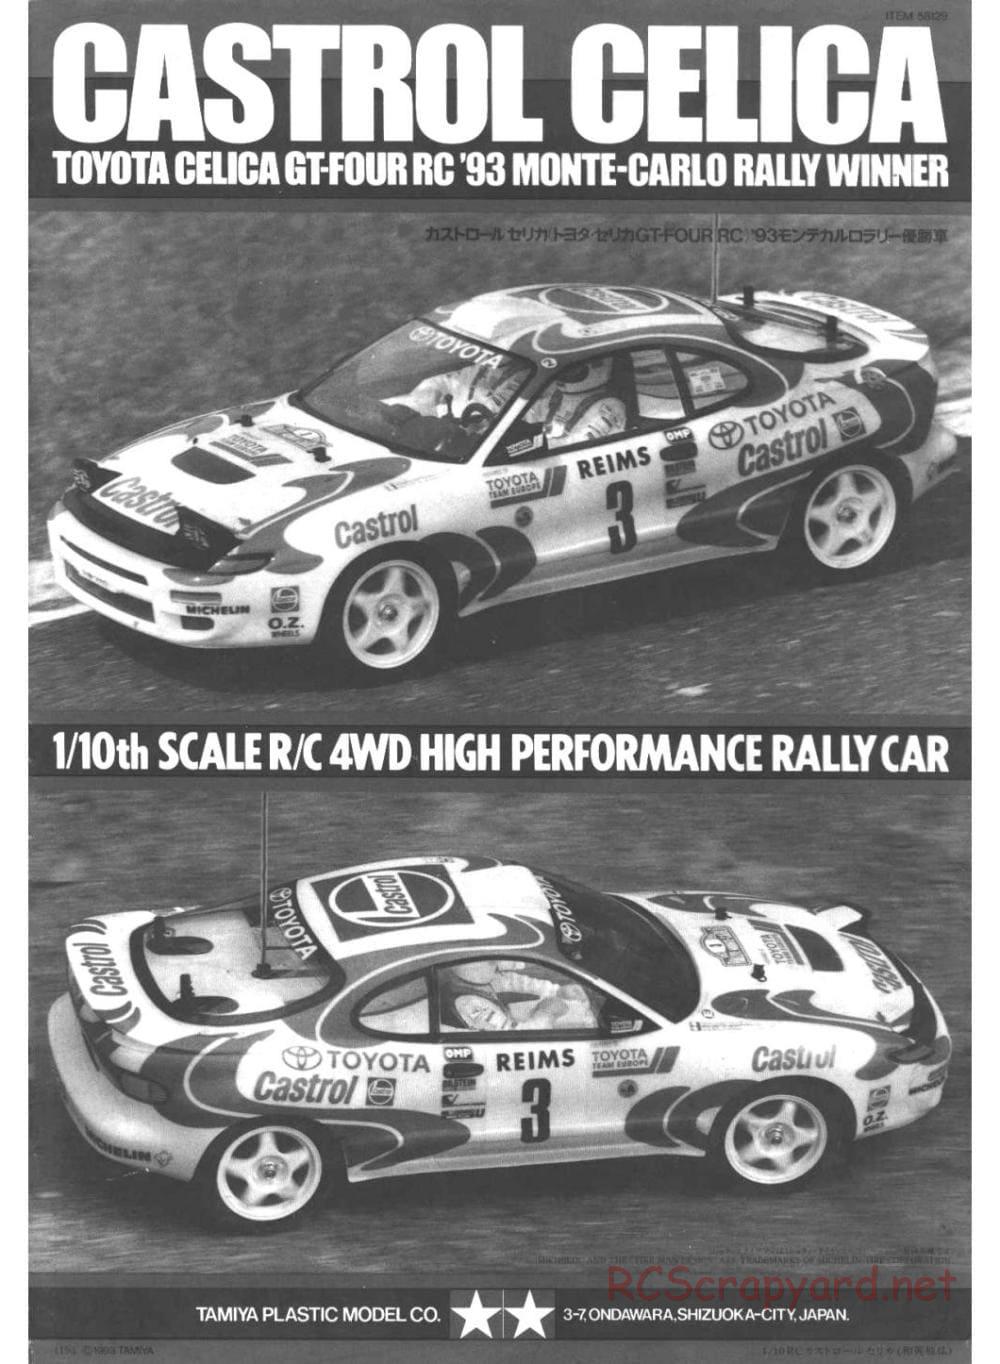 Tamiya - Castrol Celica 93 Monte-Carlo - TA-02 Chassis - Manual - Page 1